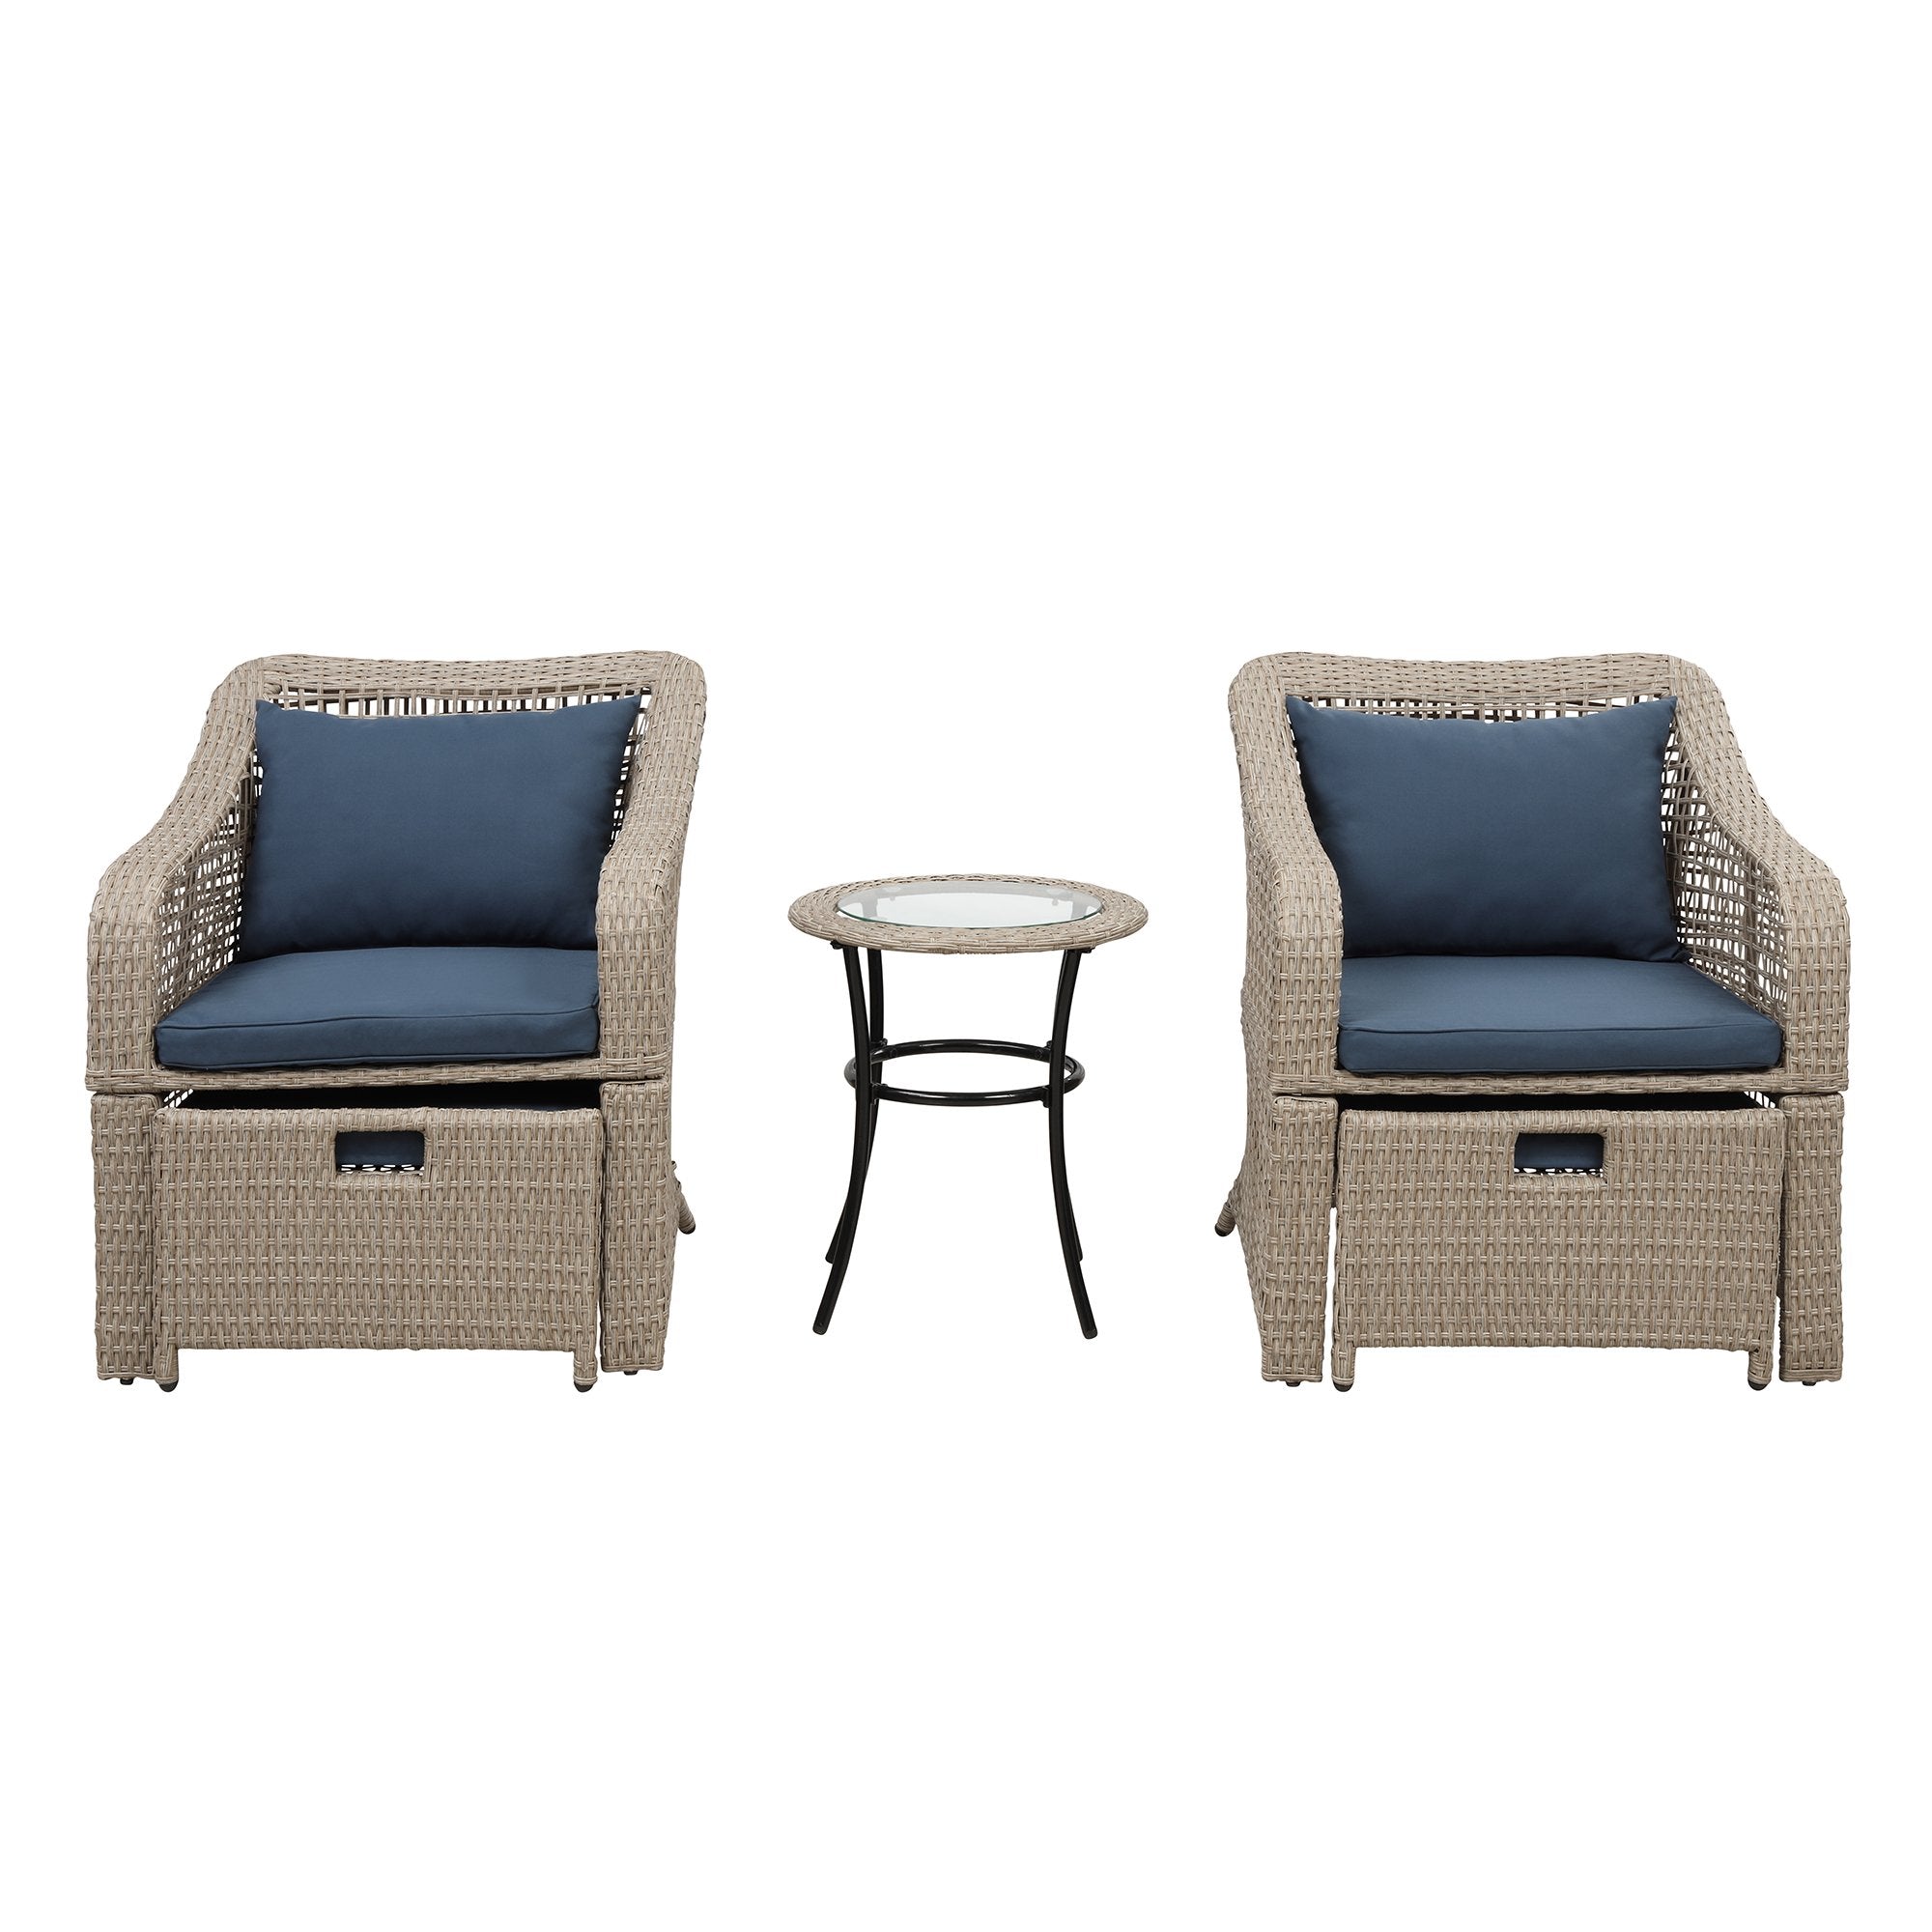 5-Piece Wicker Outdoor Dining Set with Blue Cushion